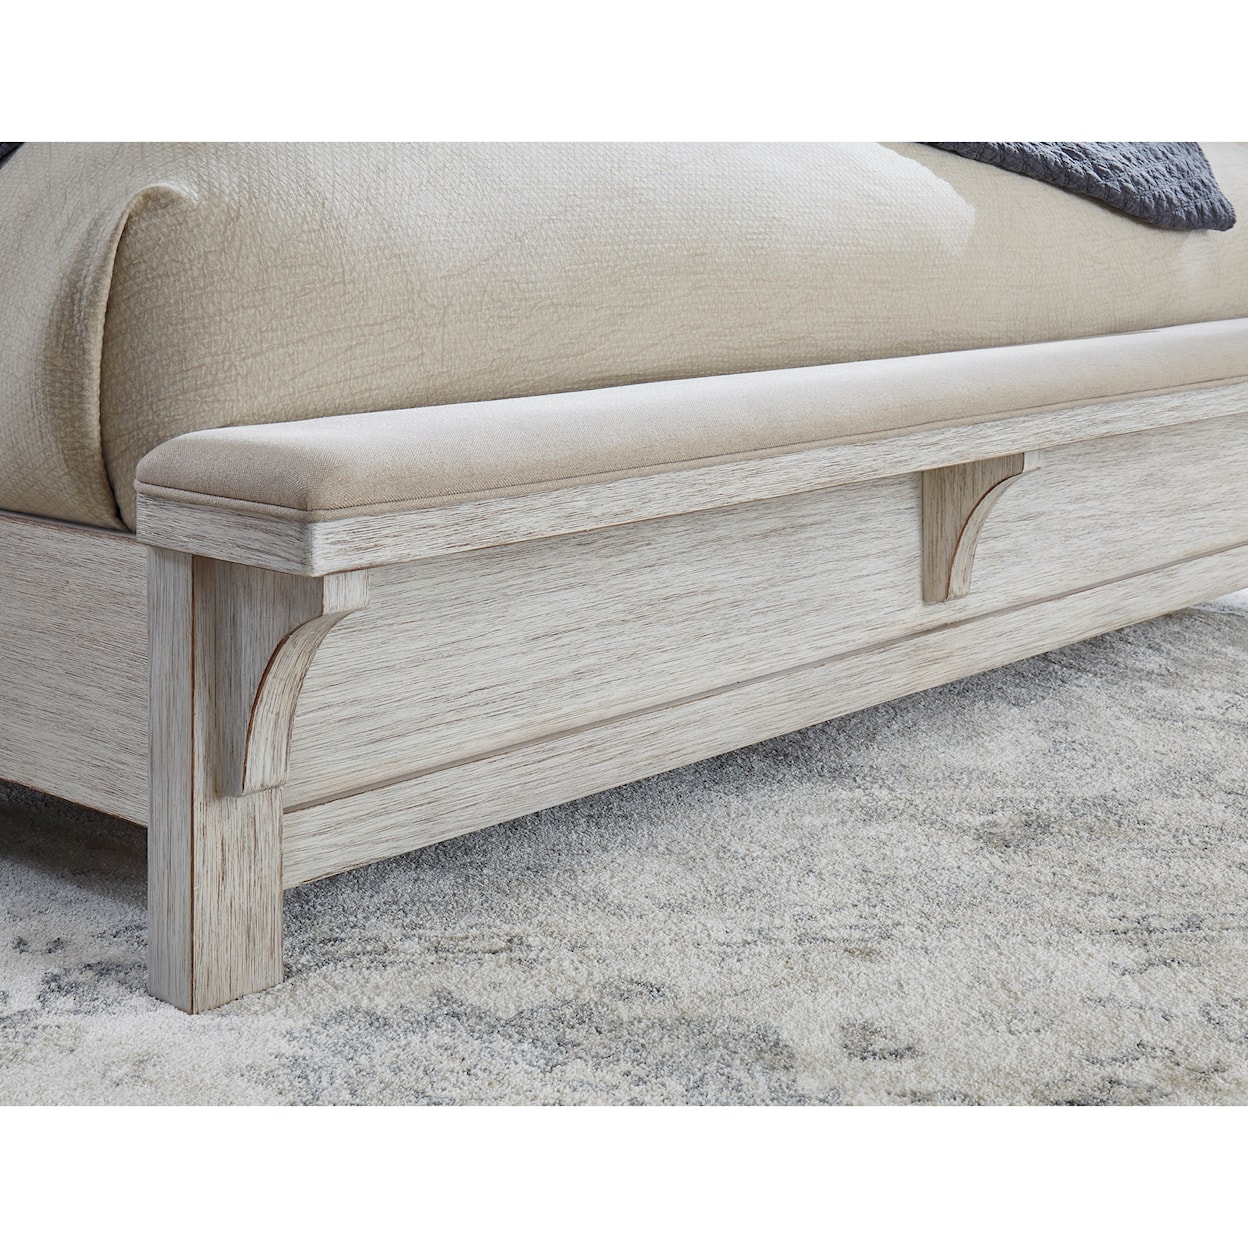 Signature Design by Ashley Furniture Brashland Queen Bed with Footboard Bench